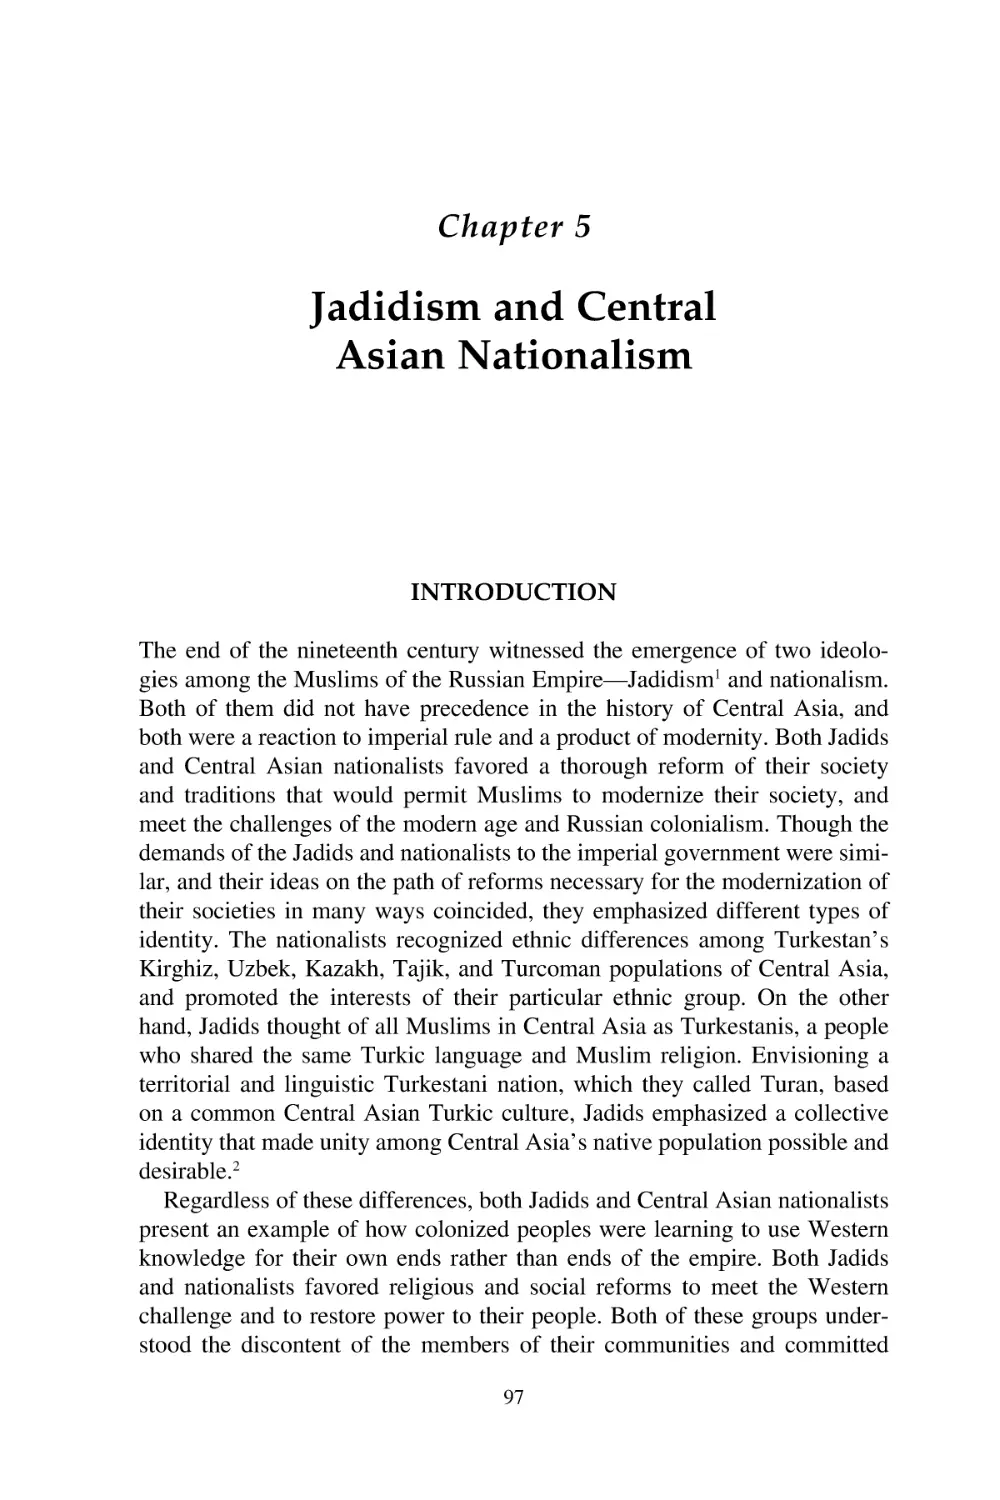 5. Jadidism and Central Asian Nationalism